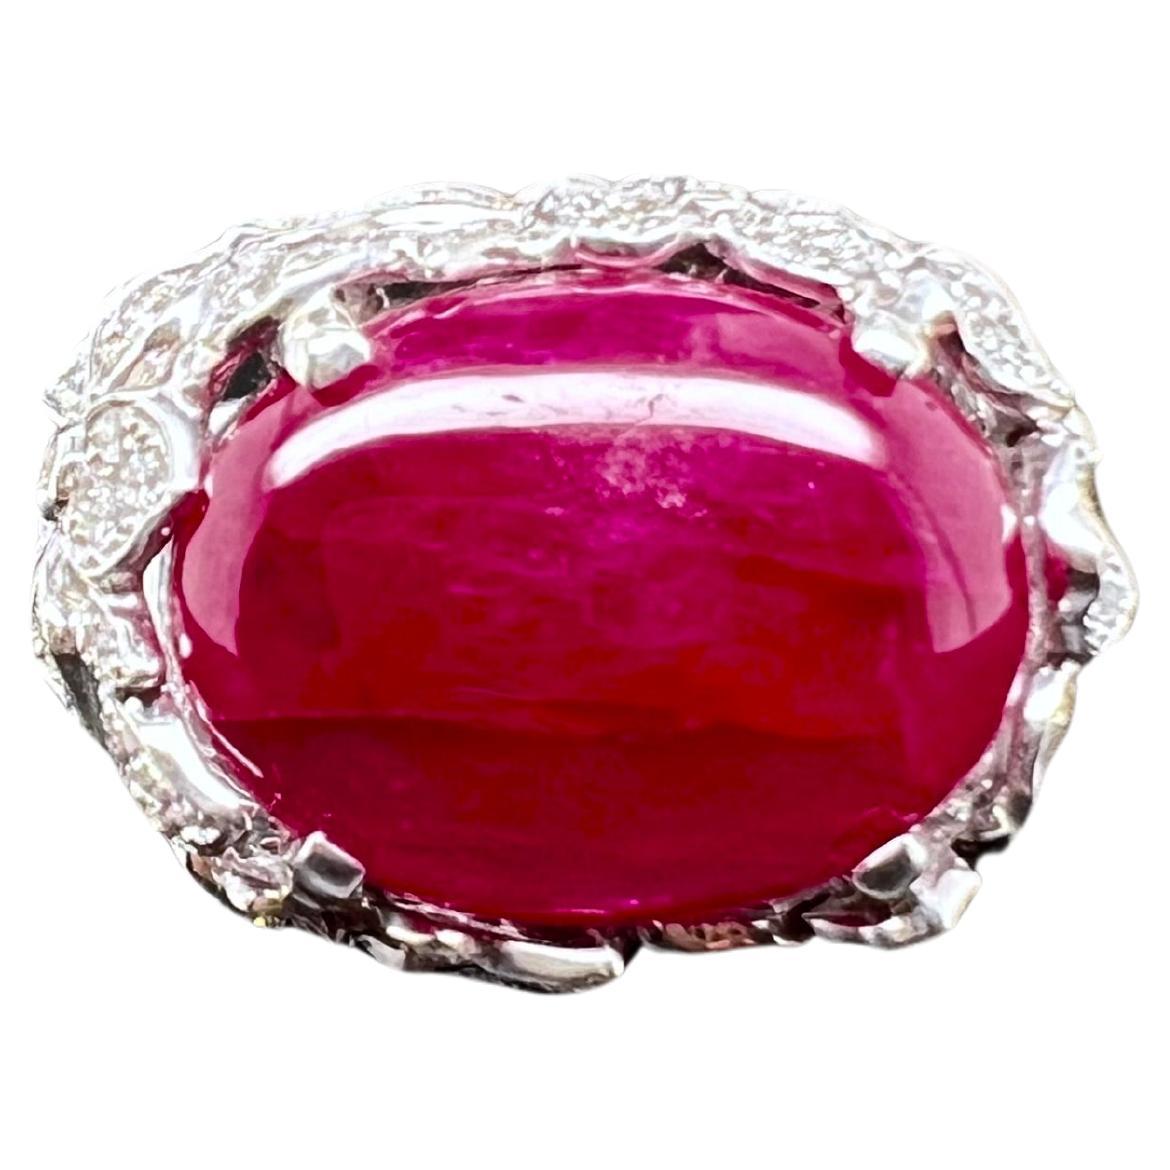 This remarkable ruby cabochon is set in a custom made 18k white gold diamond setting. The cabochon ruby is set east west style and has an amazing red-pink hue glow. The diamond setting has a flower pattern that elevate and hold up the ruby. The ring